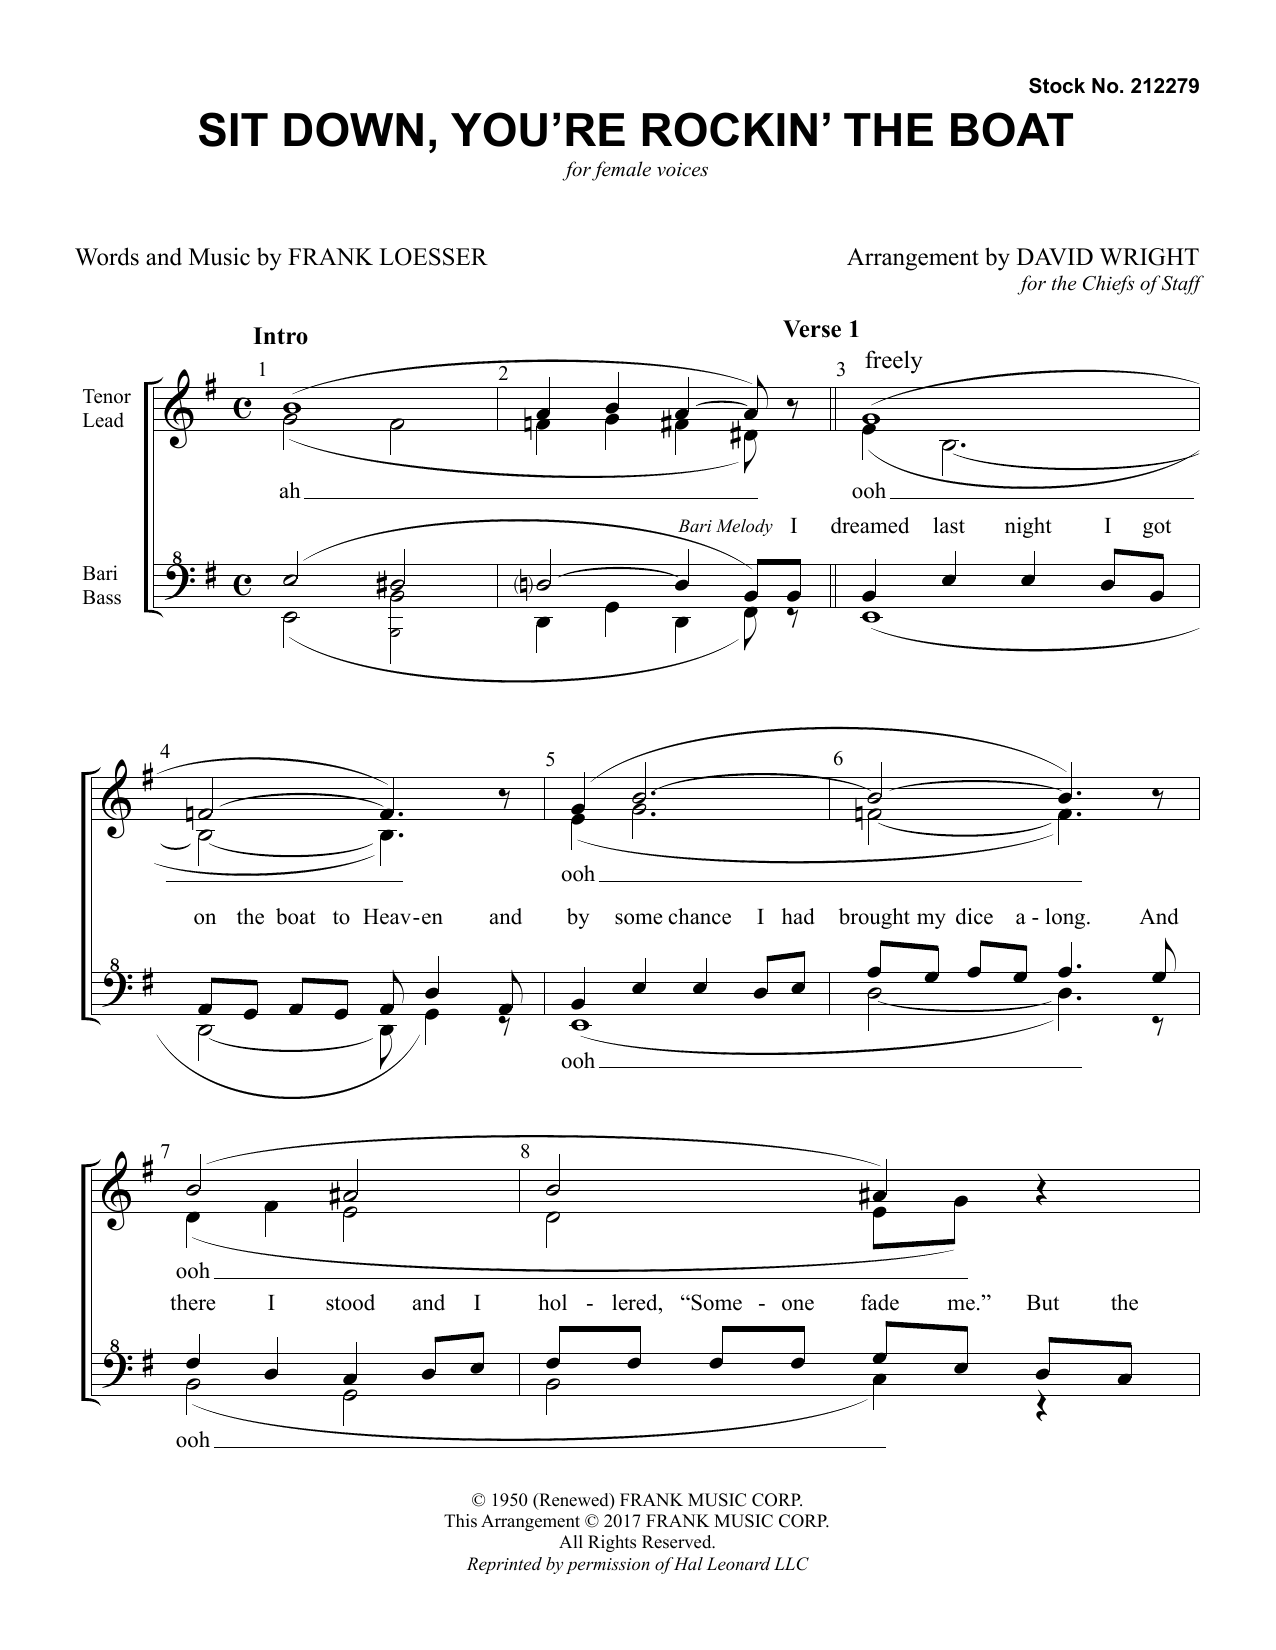 Download Chiefs of Staff Sit Down, You're Rockin' The Boat (from Sheet Music